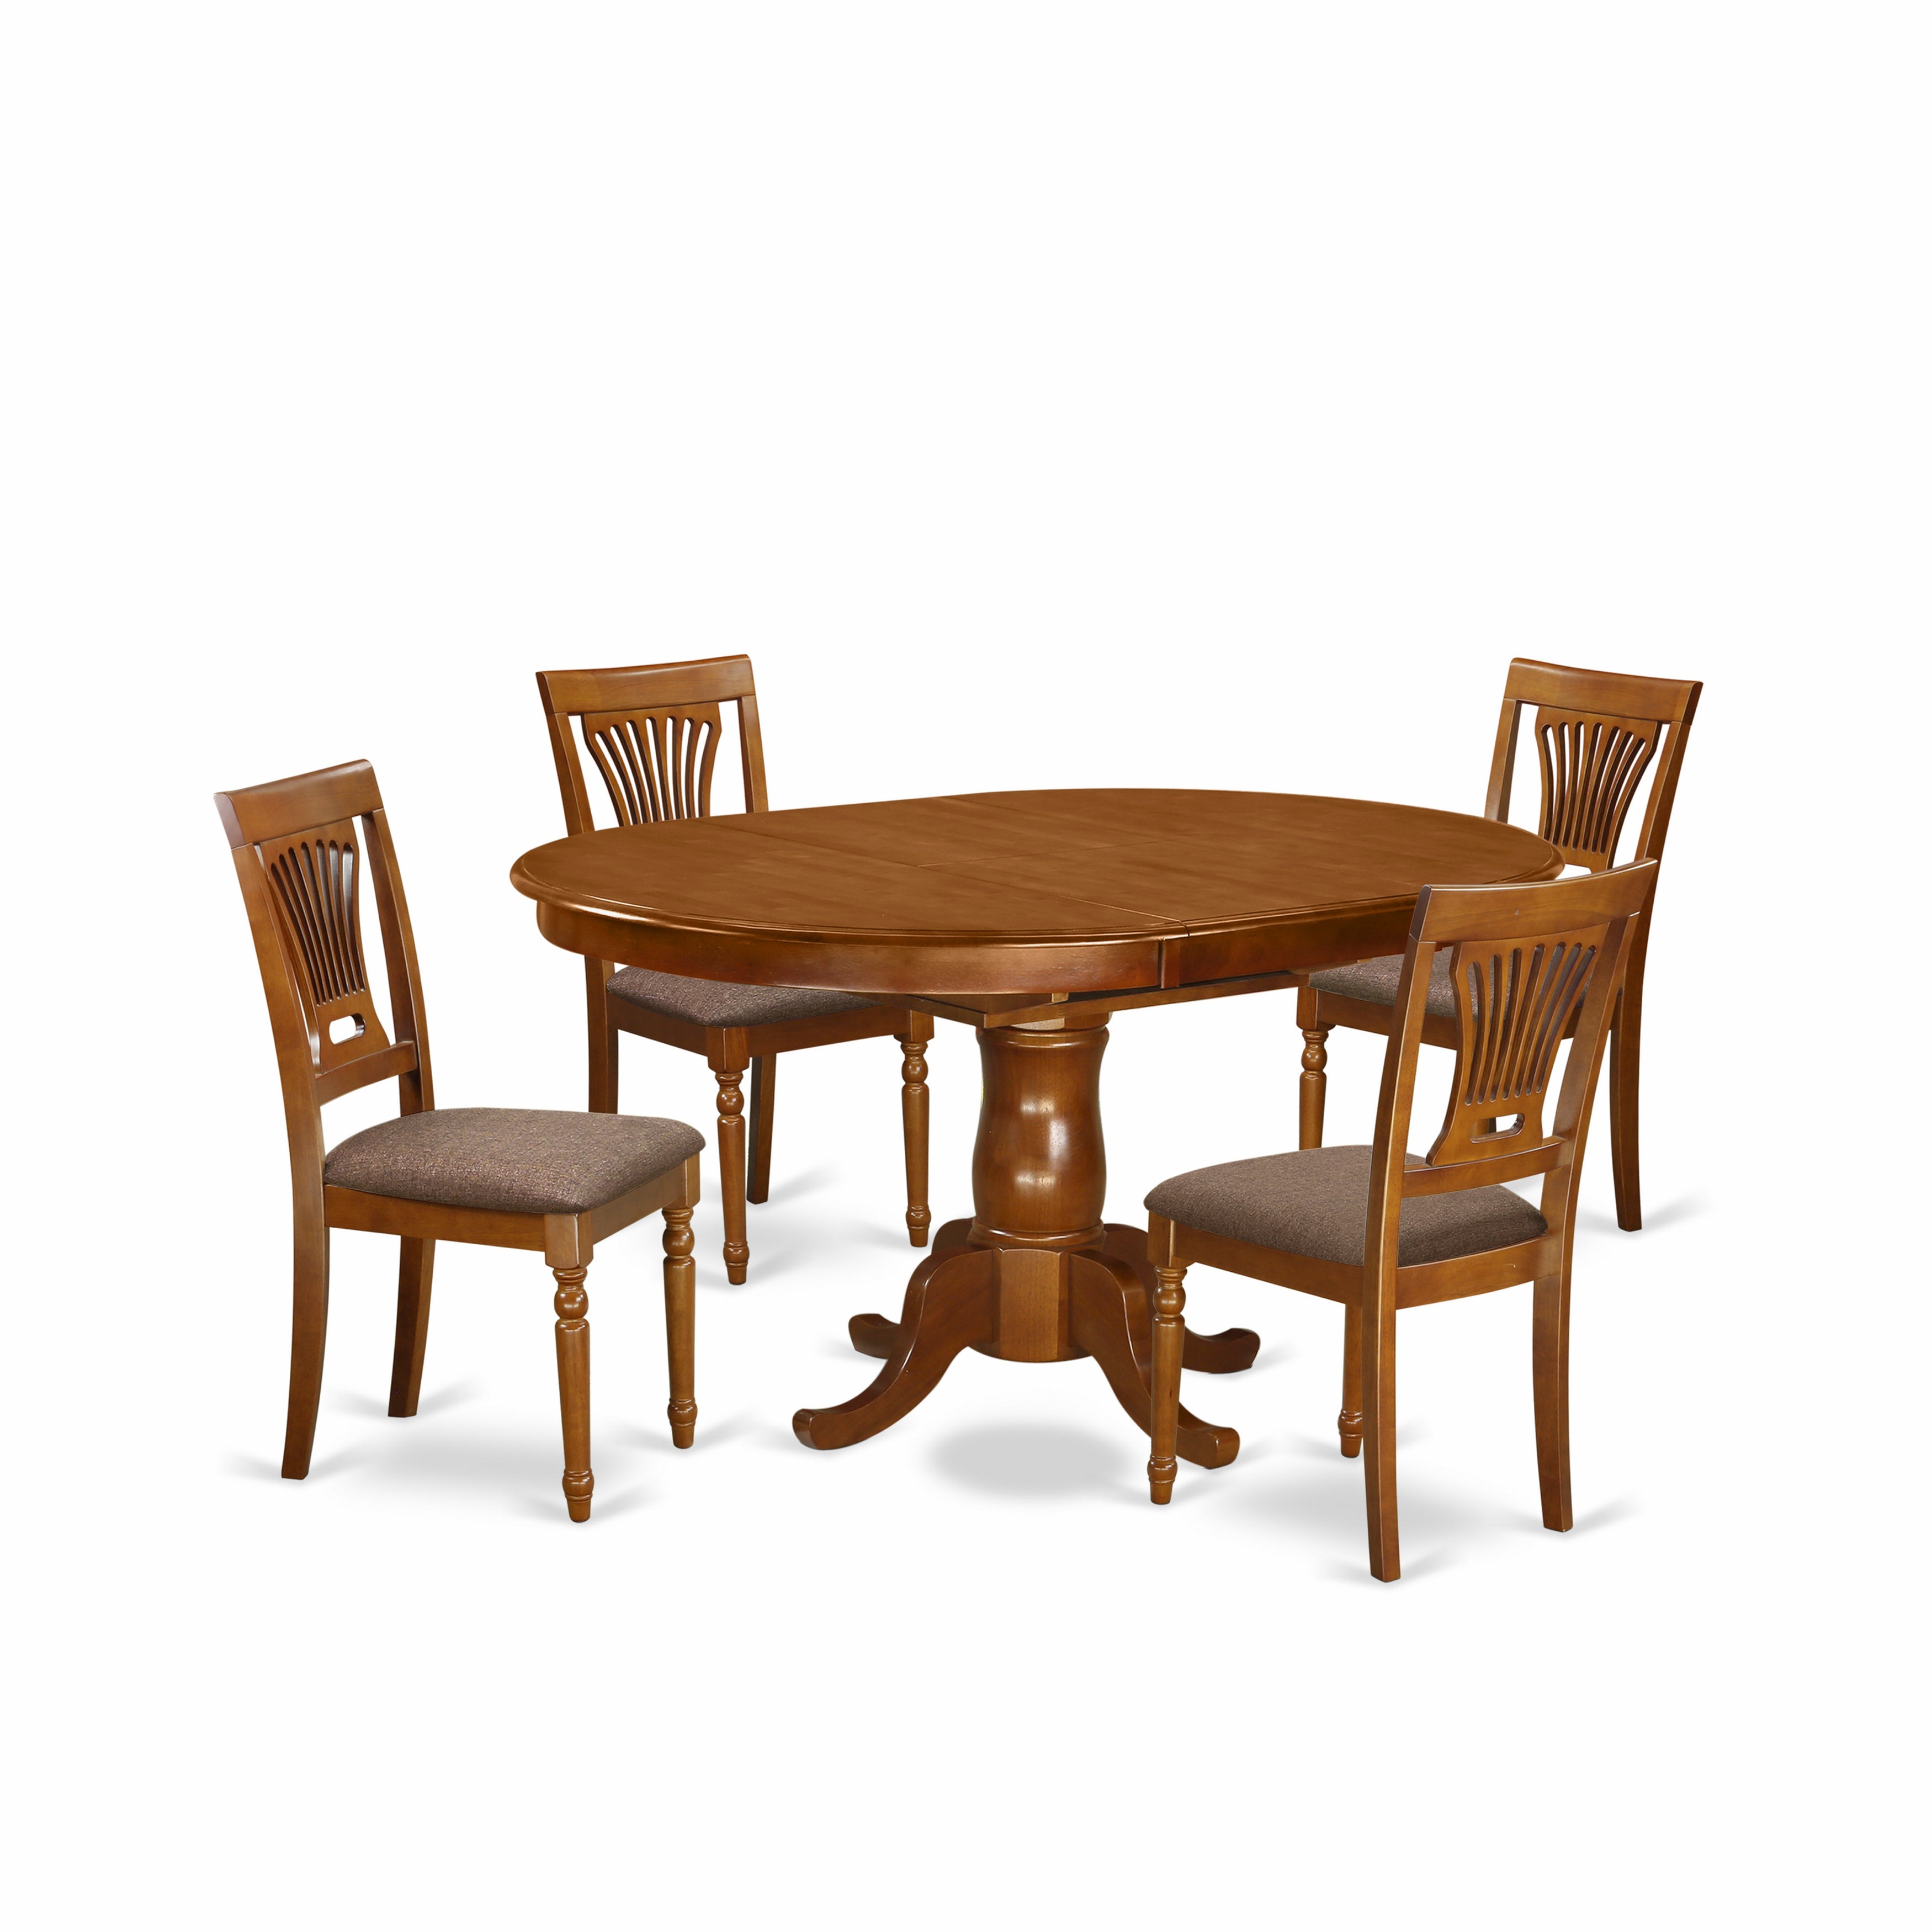 5 Pc Portland Dining Room Oval Table With Leaf and 4 Chairs in Saddle Brown